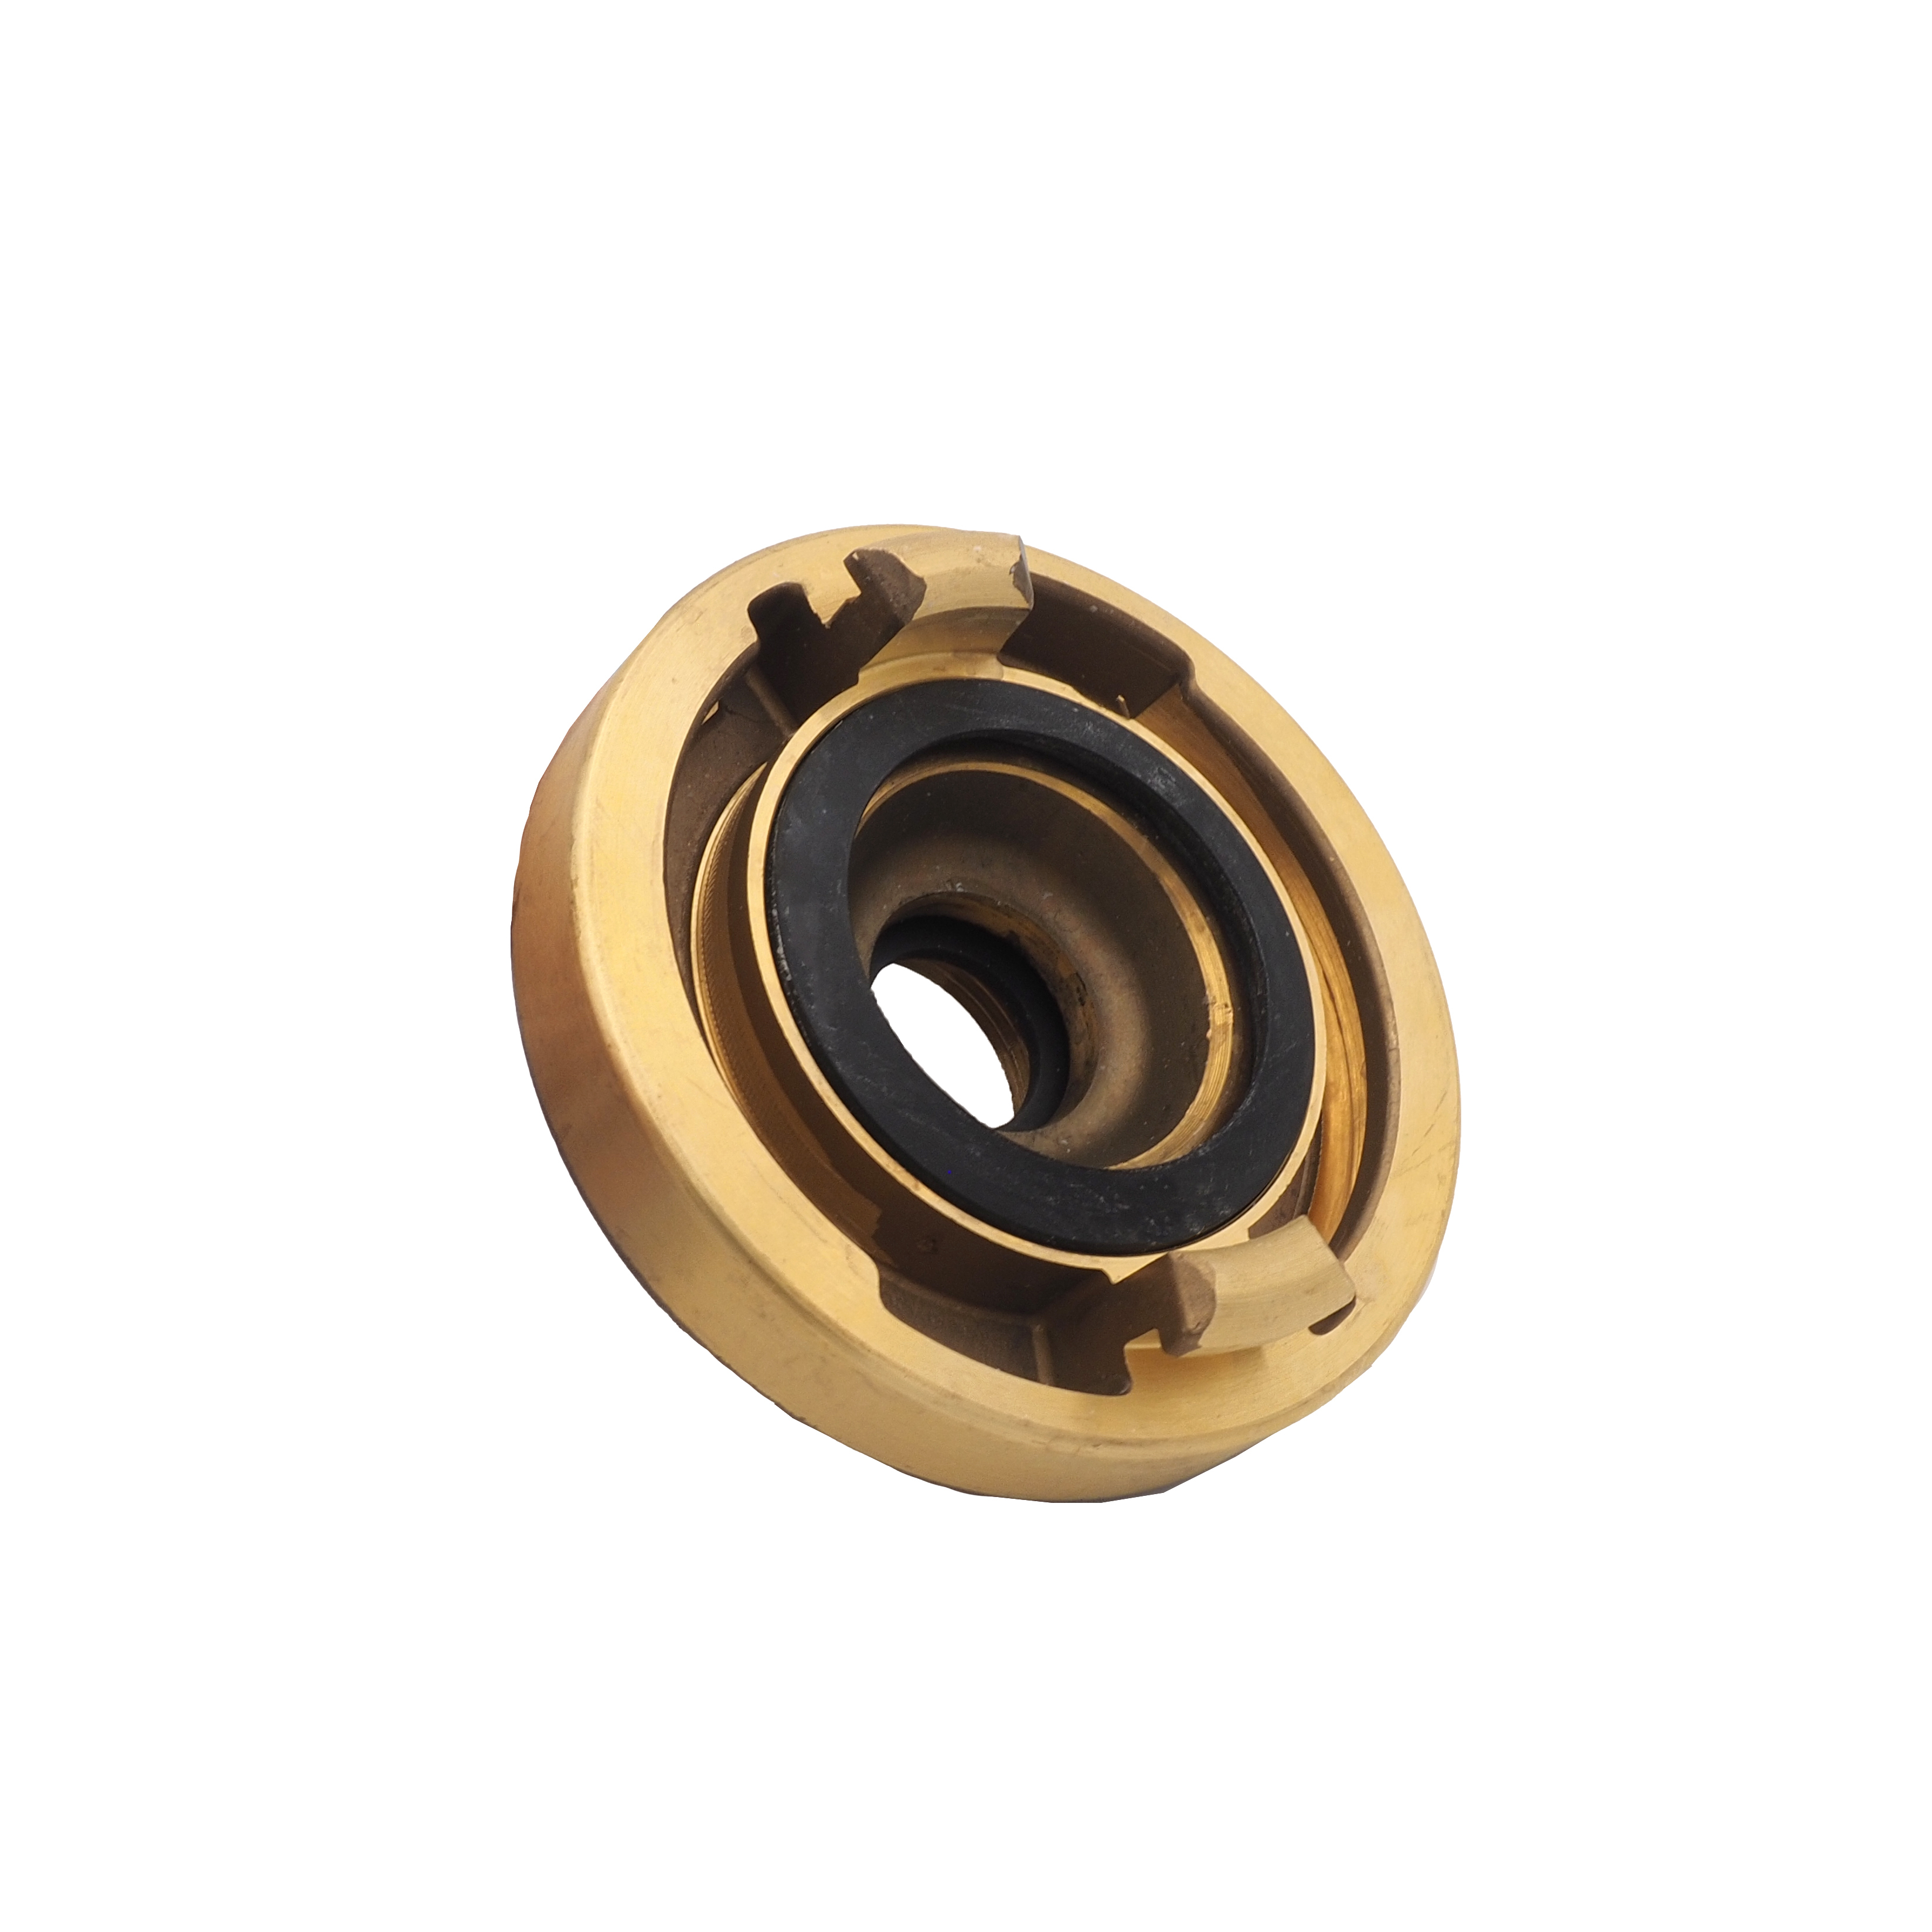 C-fixed coupling to 1 inch IT  brass